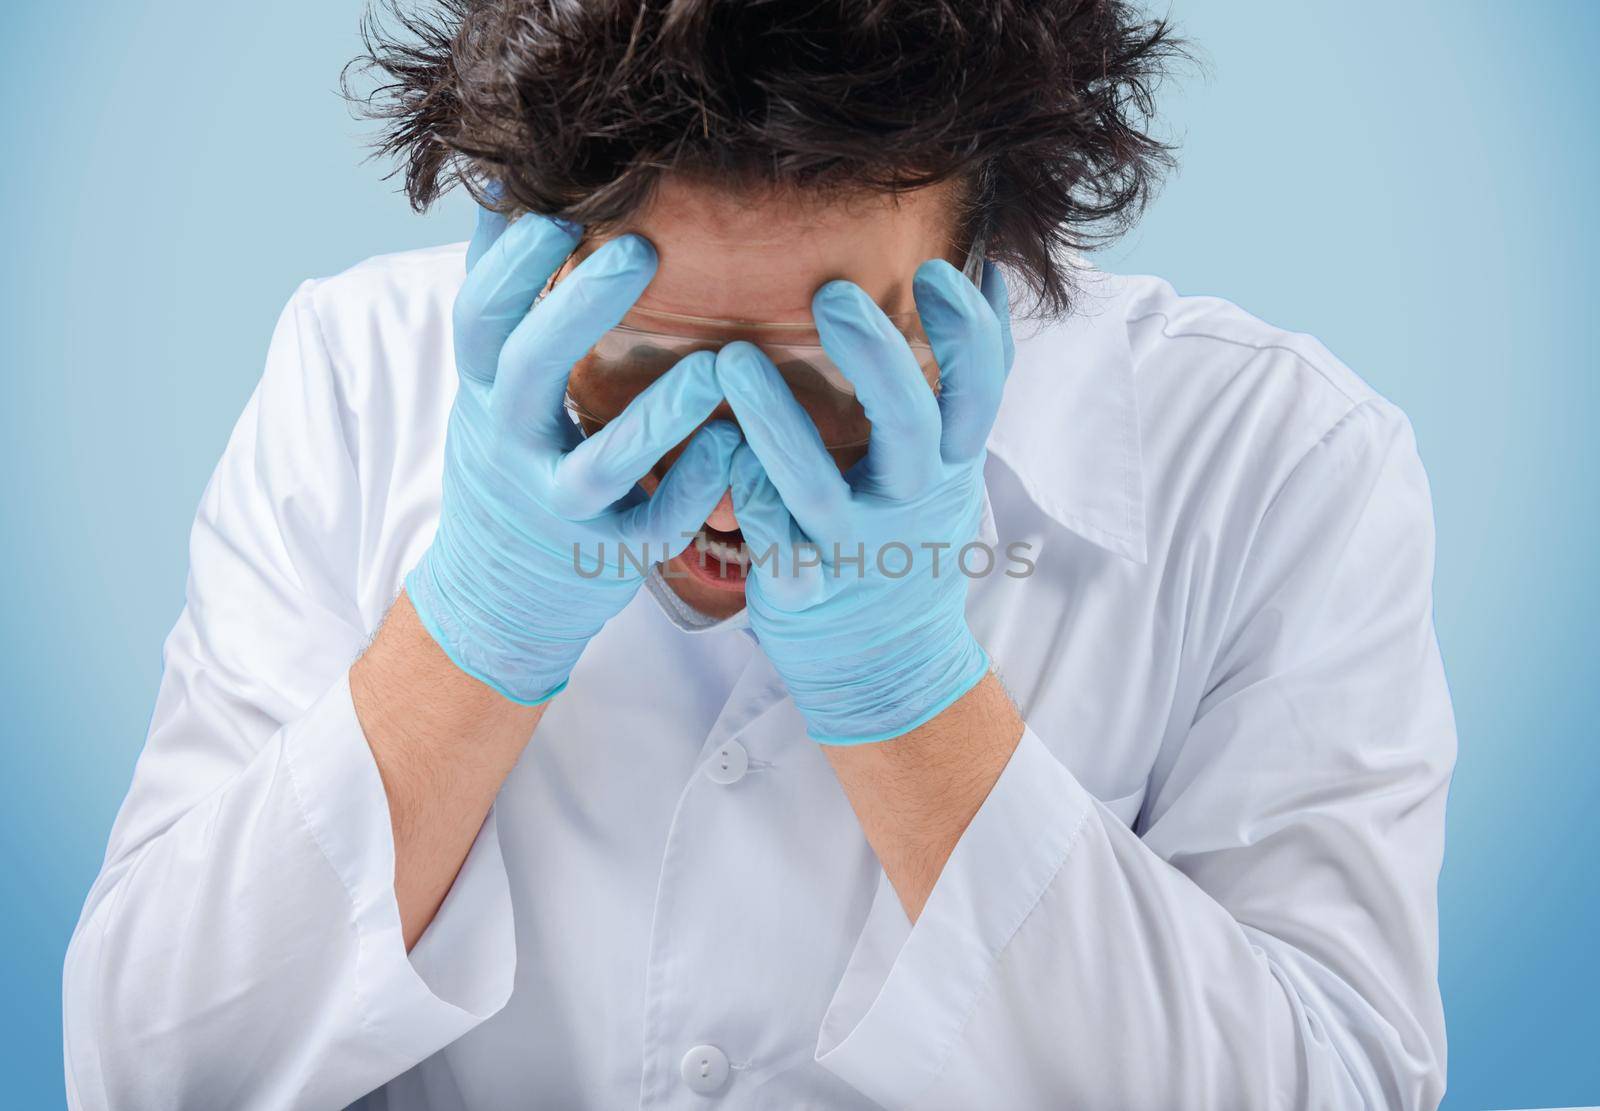 Sad crazy man doctor holds his face